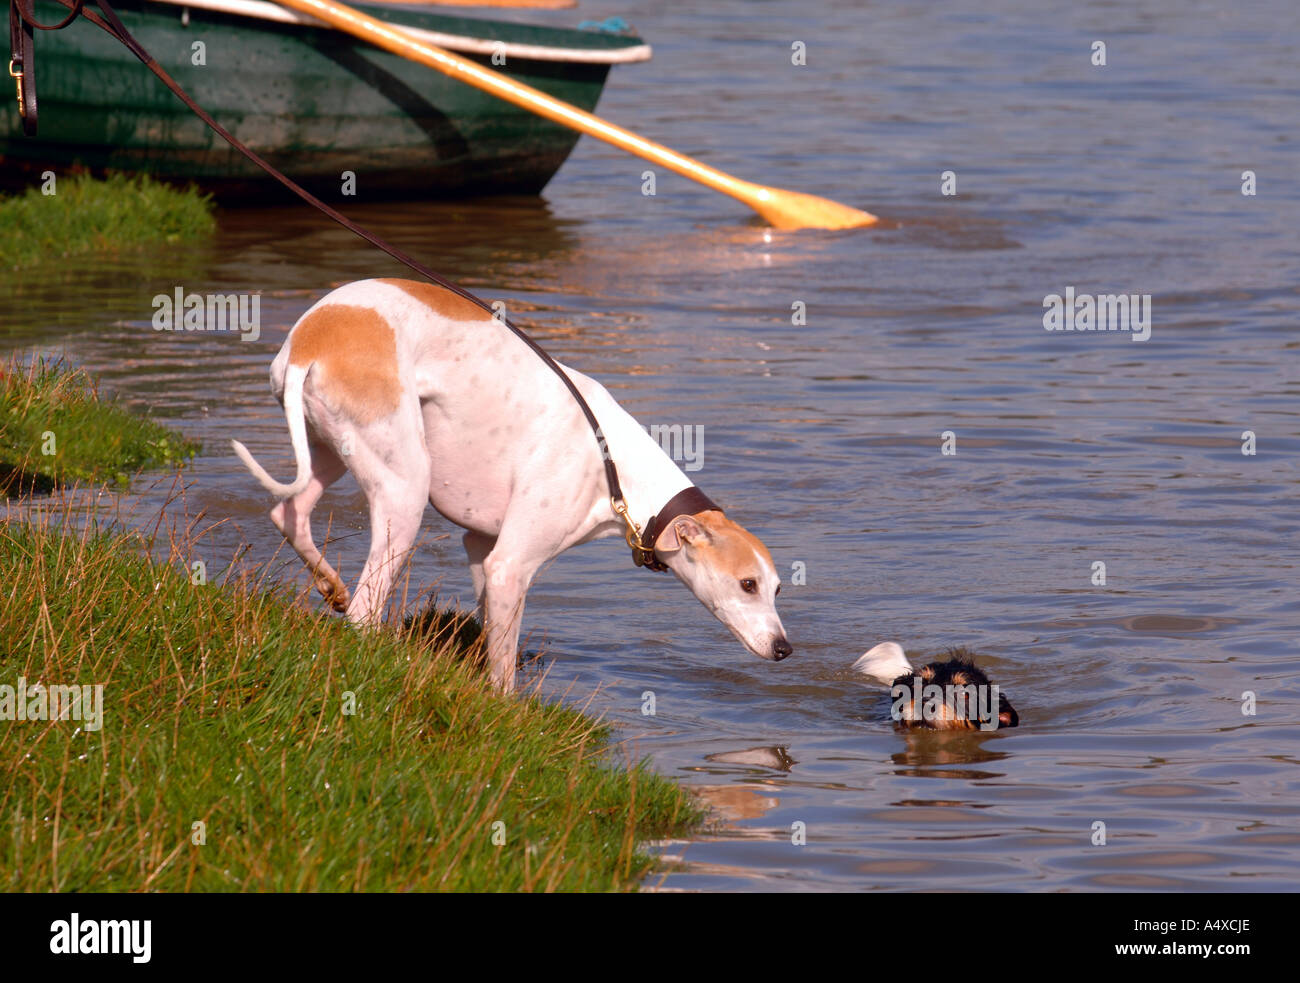 TWO DOGS PLAYING ON THE SHORES OF A LAKE UK Stock Photo